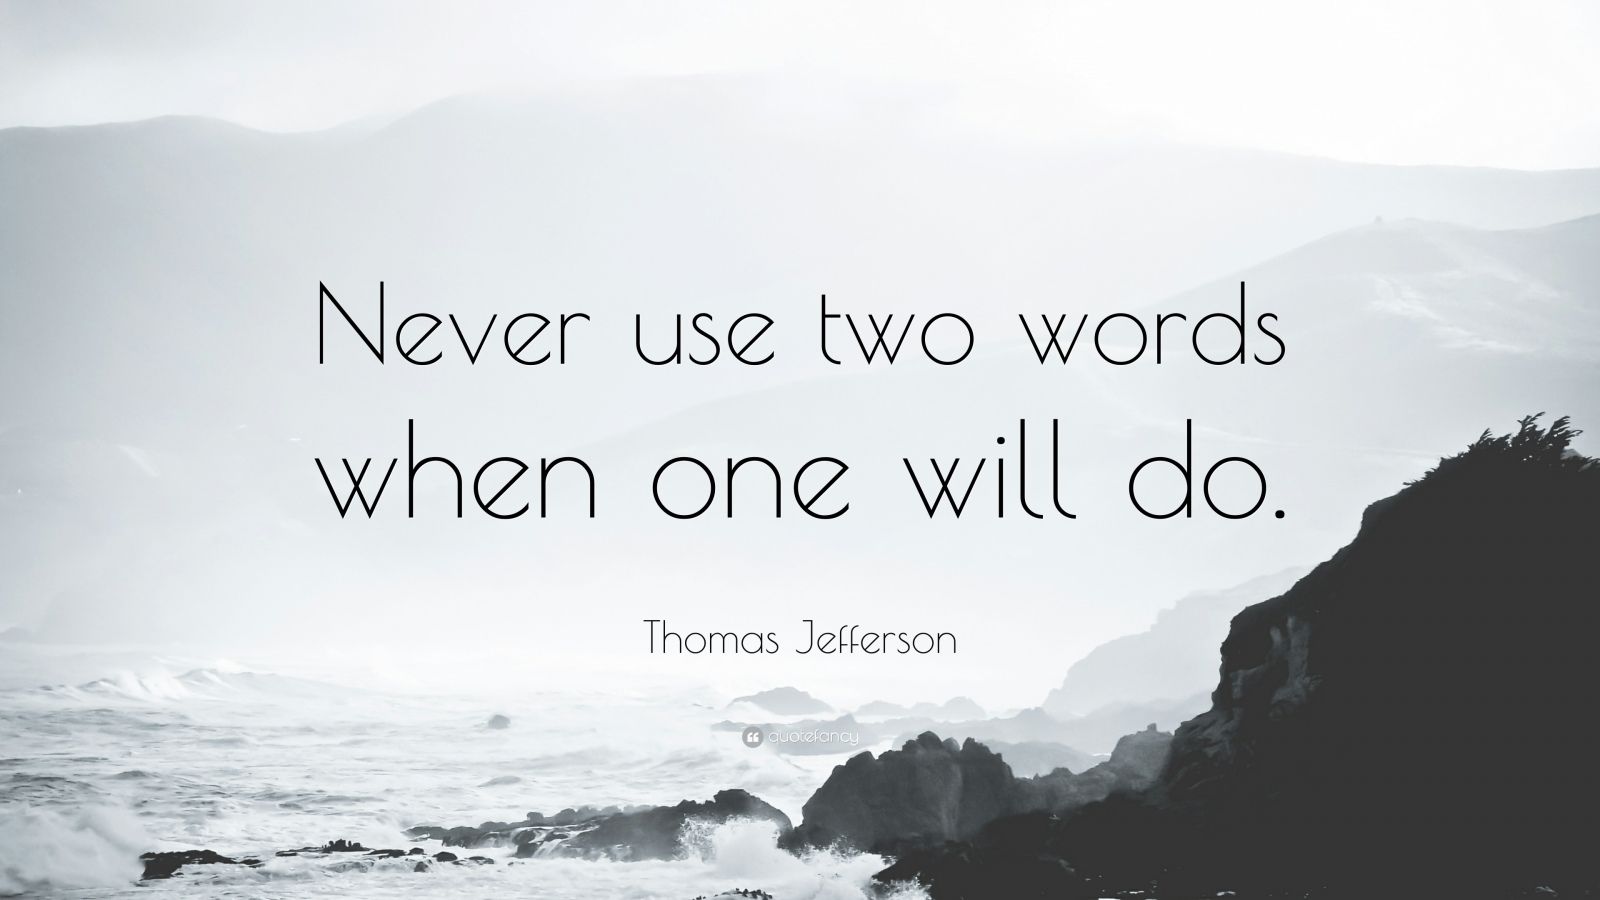 Thomas Jefferson Quote: “Never use two words when one will do.” (10 ...